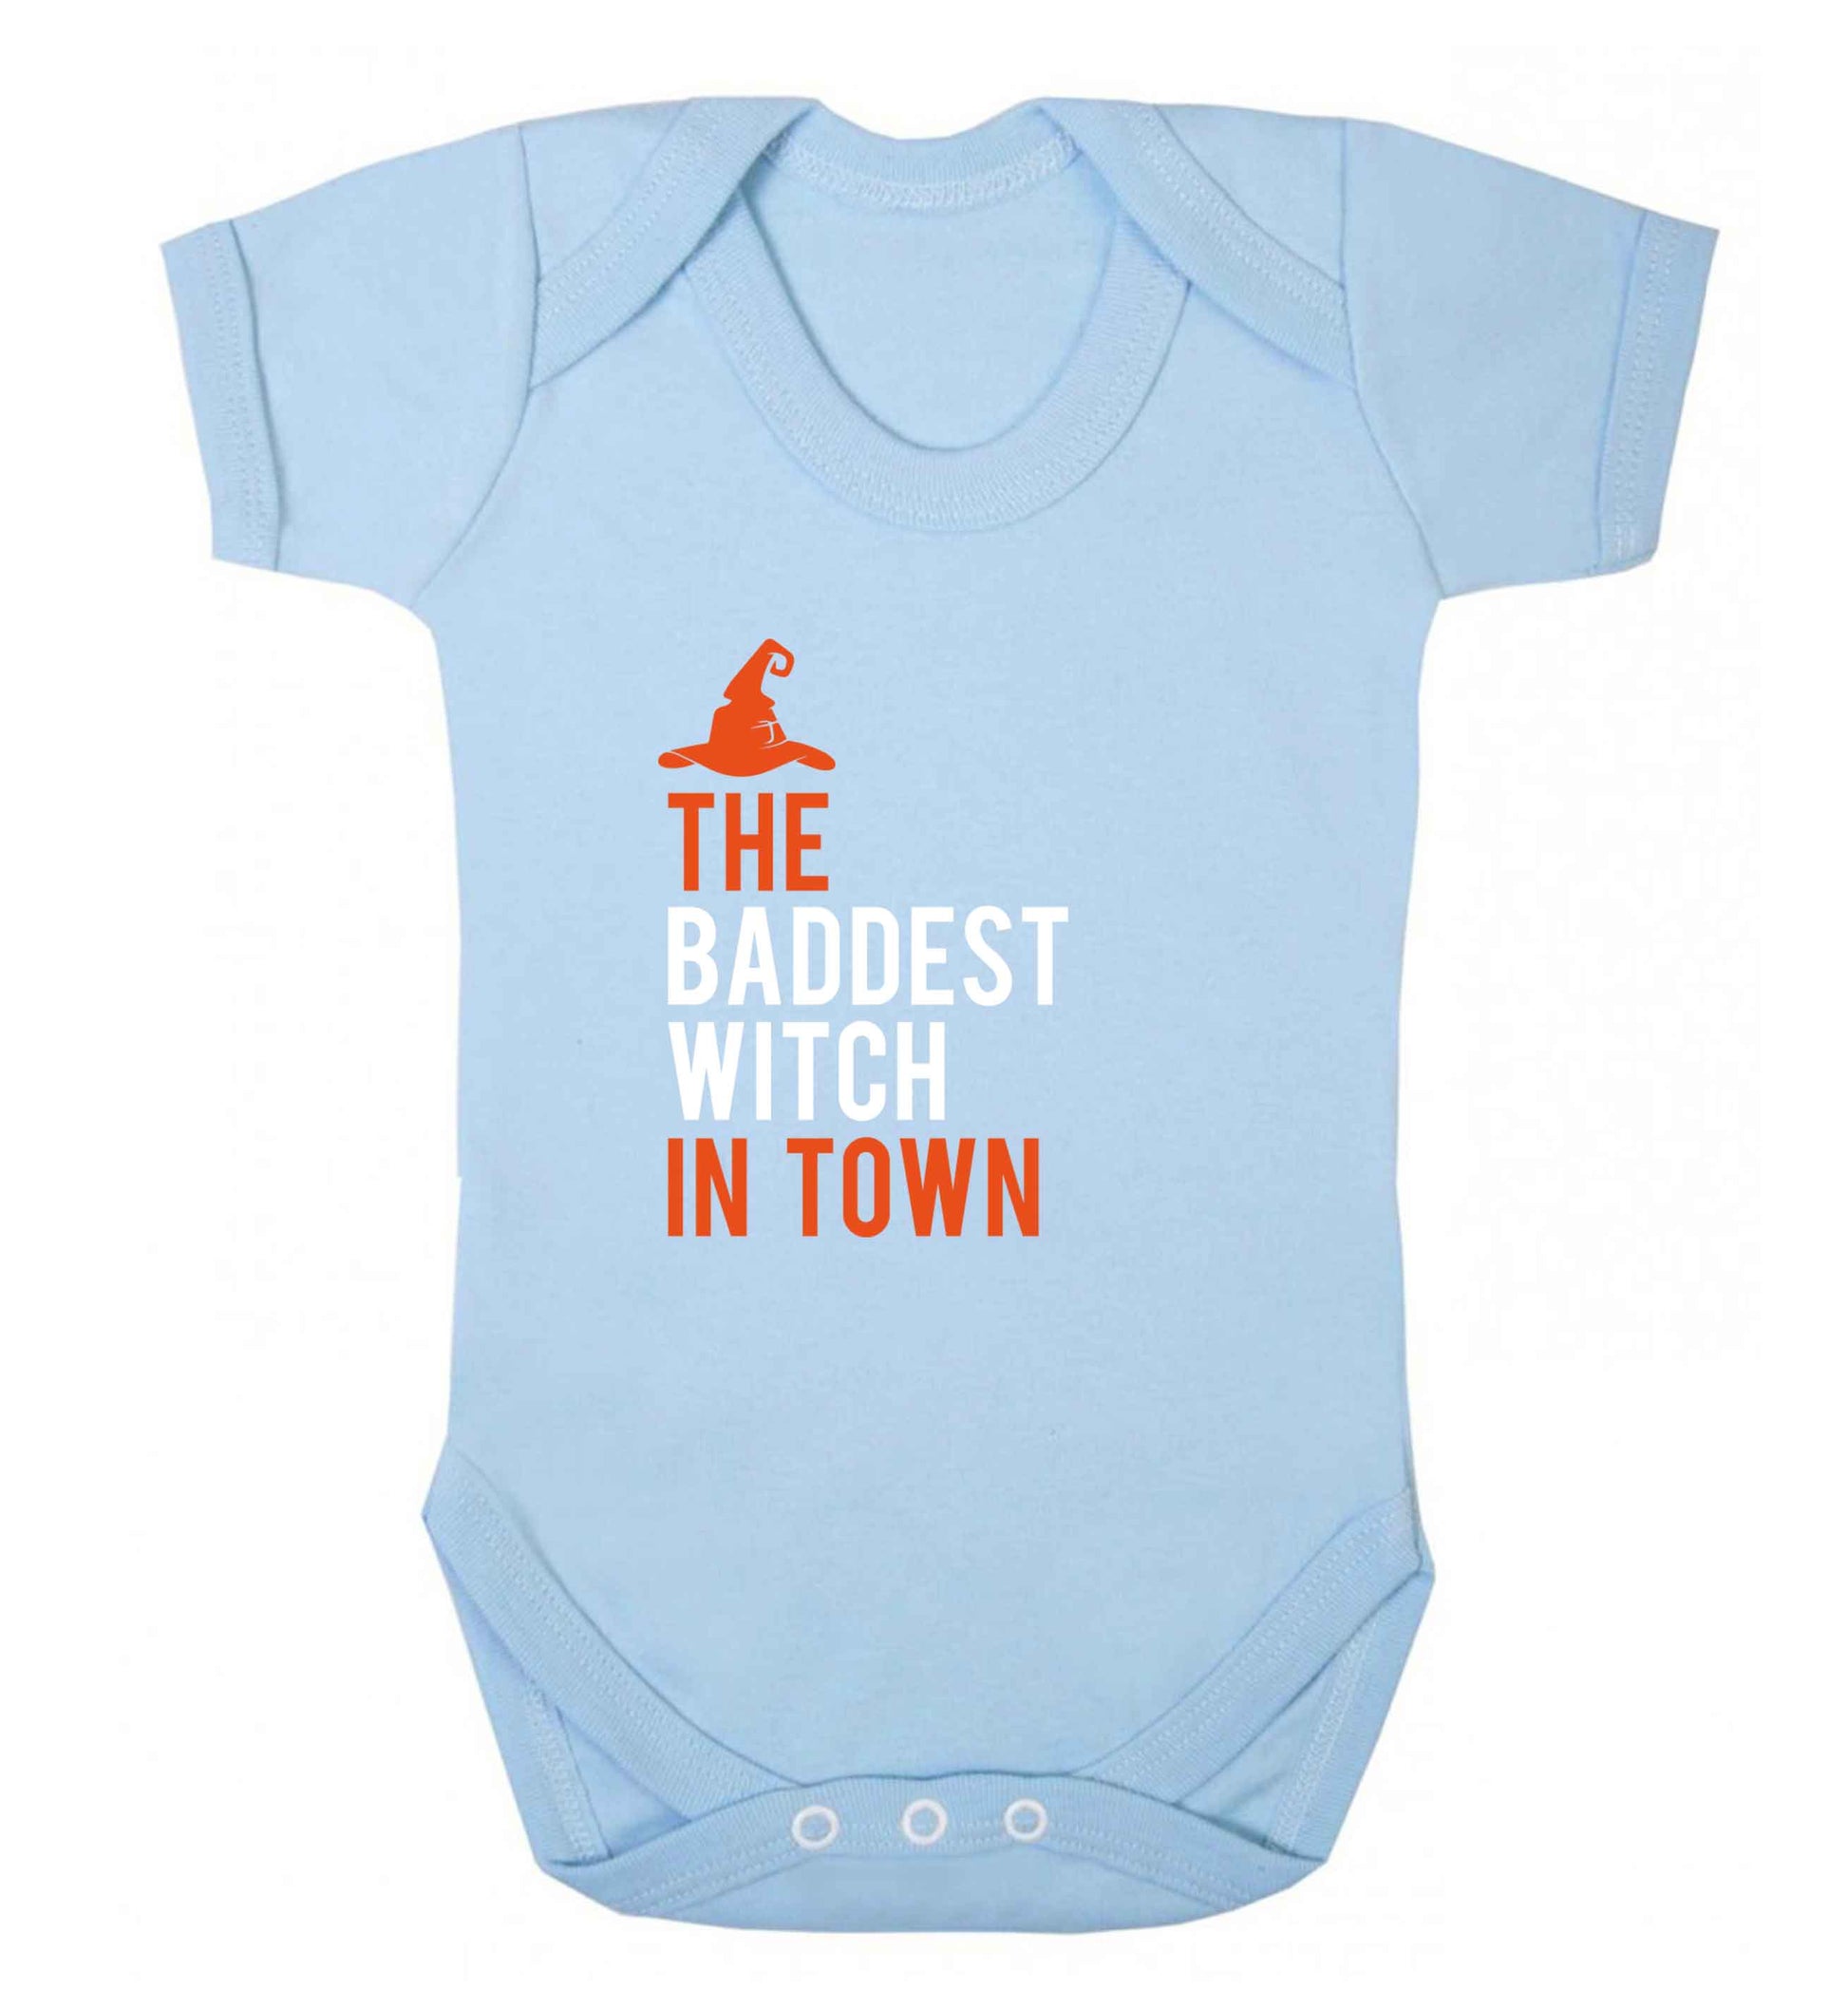 Badest witch in town baby vest pale blue 18-24 months